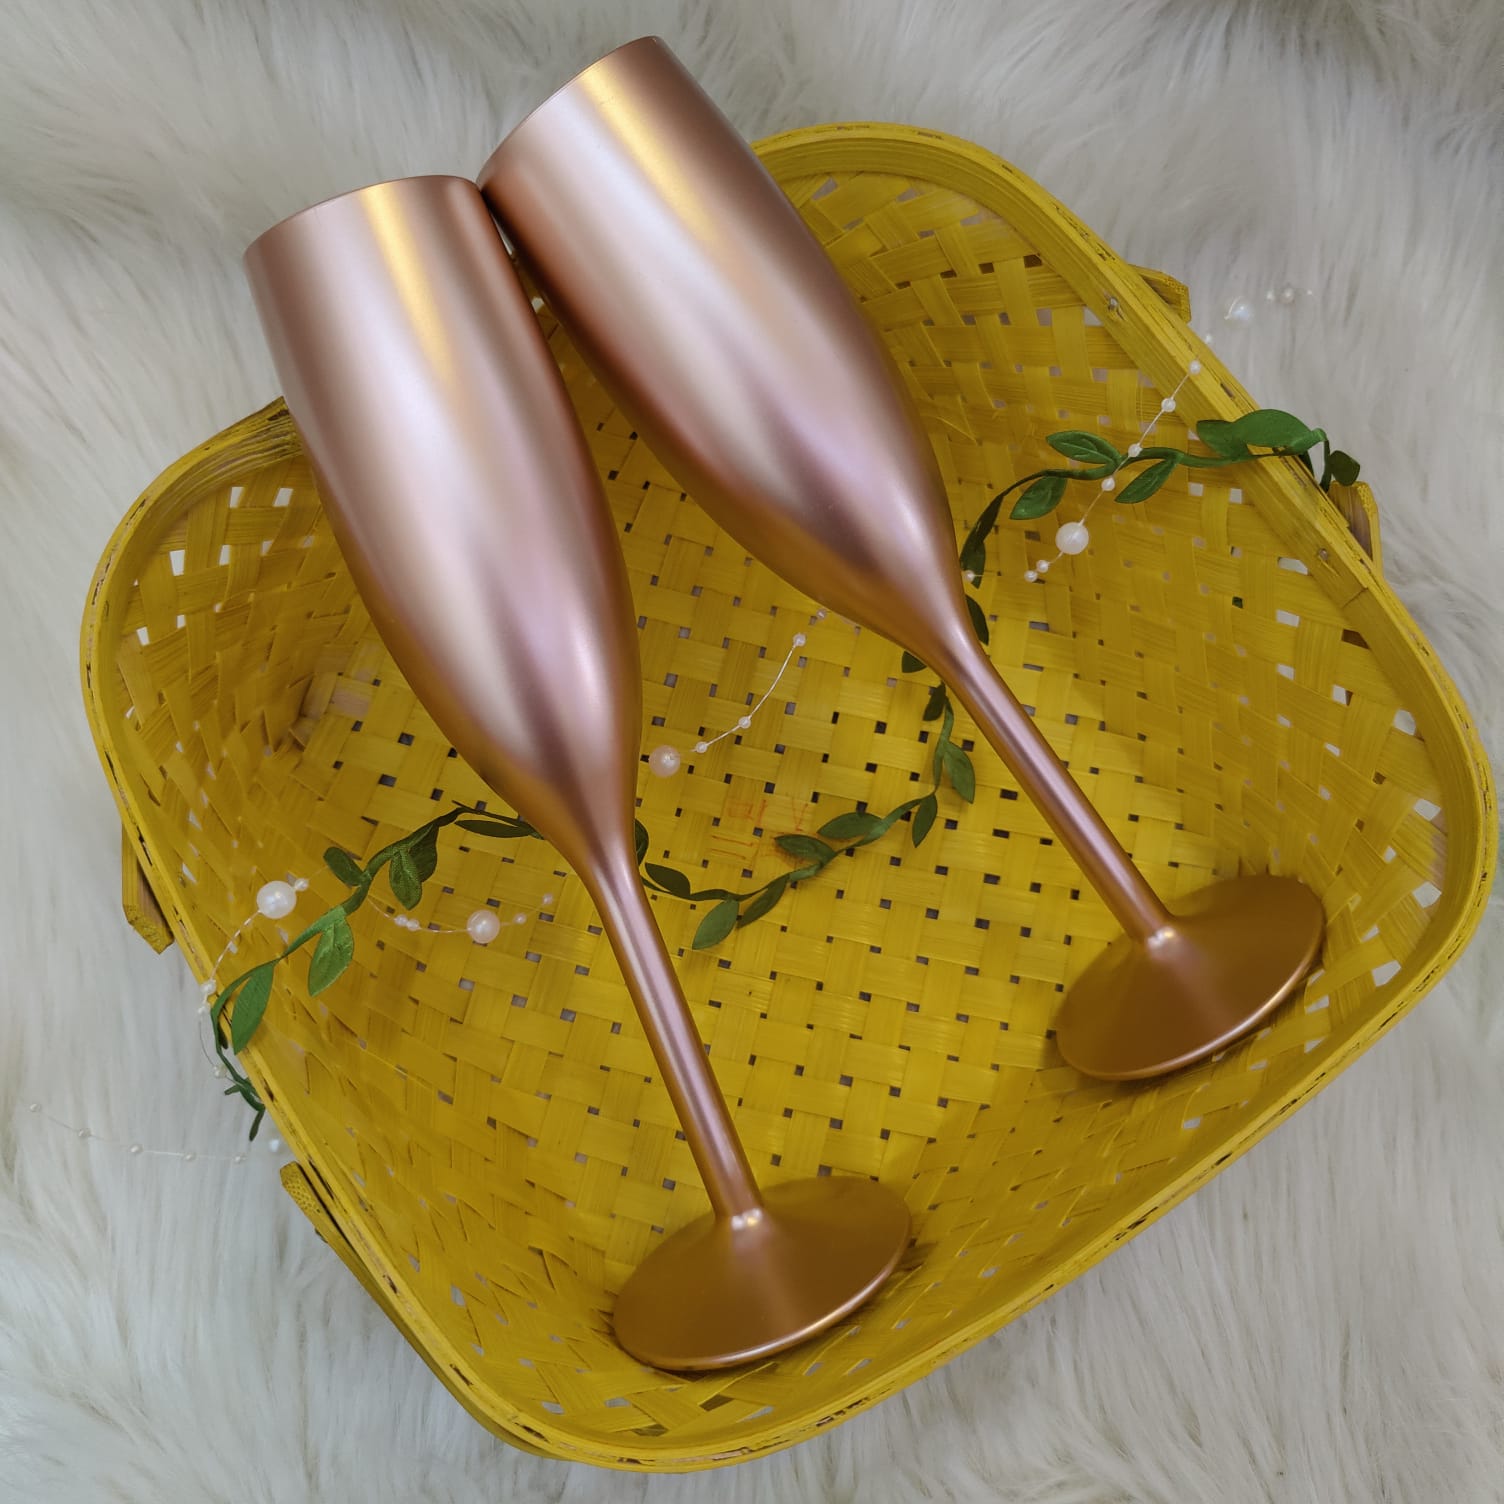 Unbreakable Champagne Flutes- Set of 2 :-Classy copper